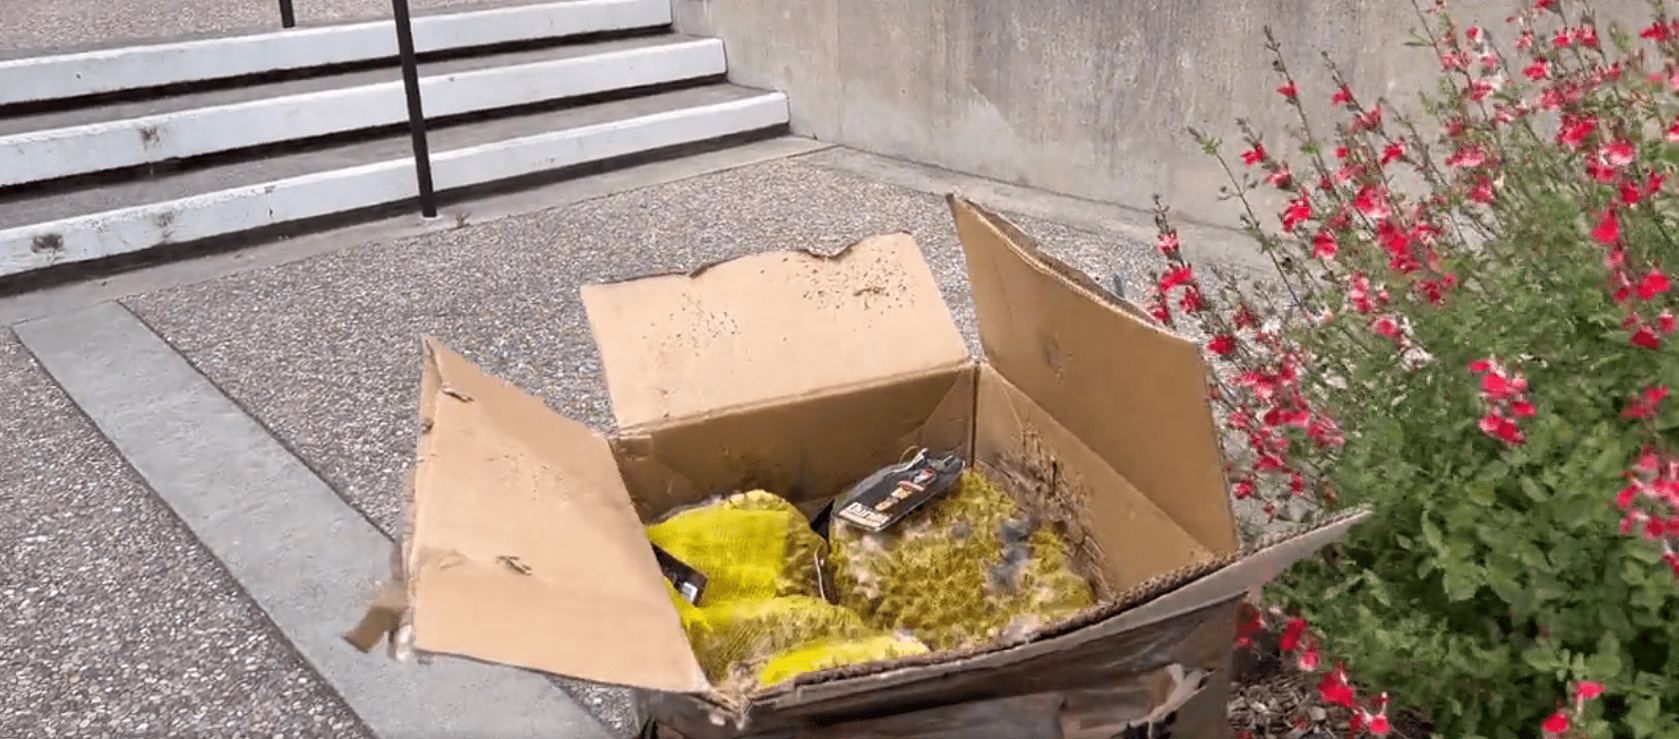 rotting-fruit-in-a-box-on-smith-ranch-road-san-rafael-police